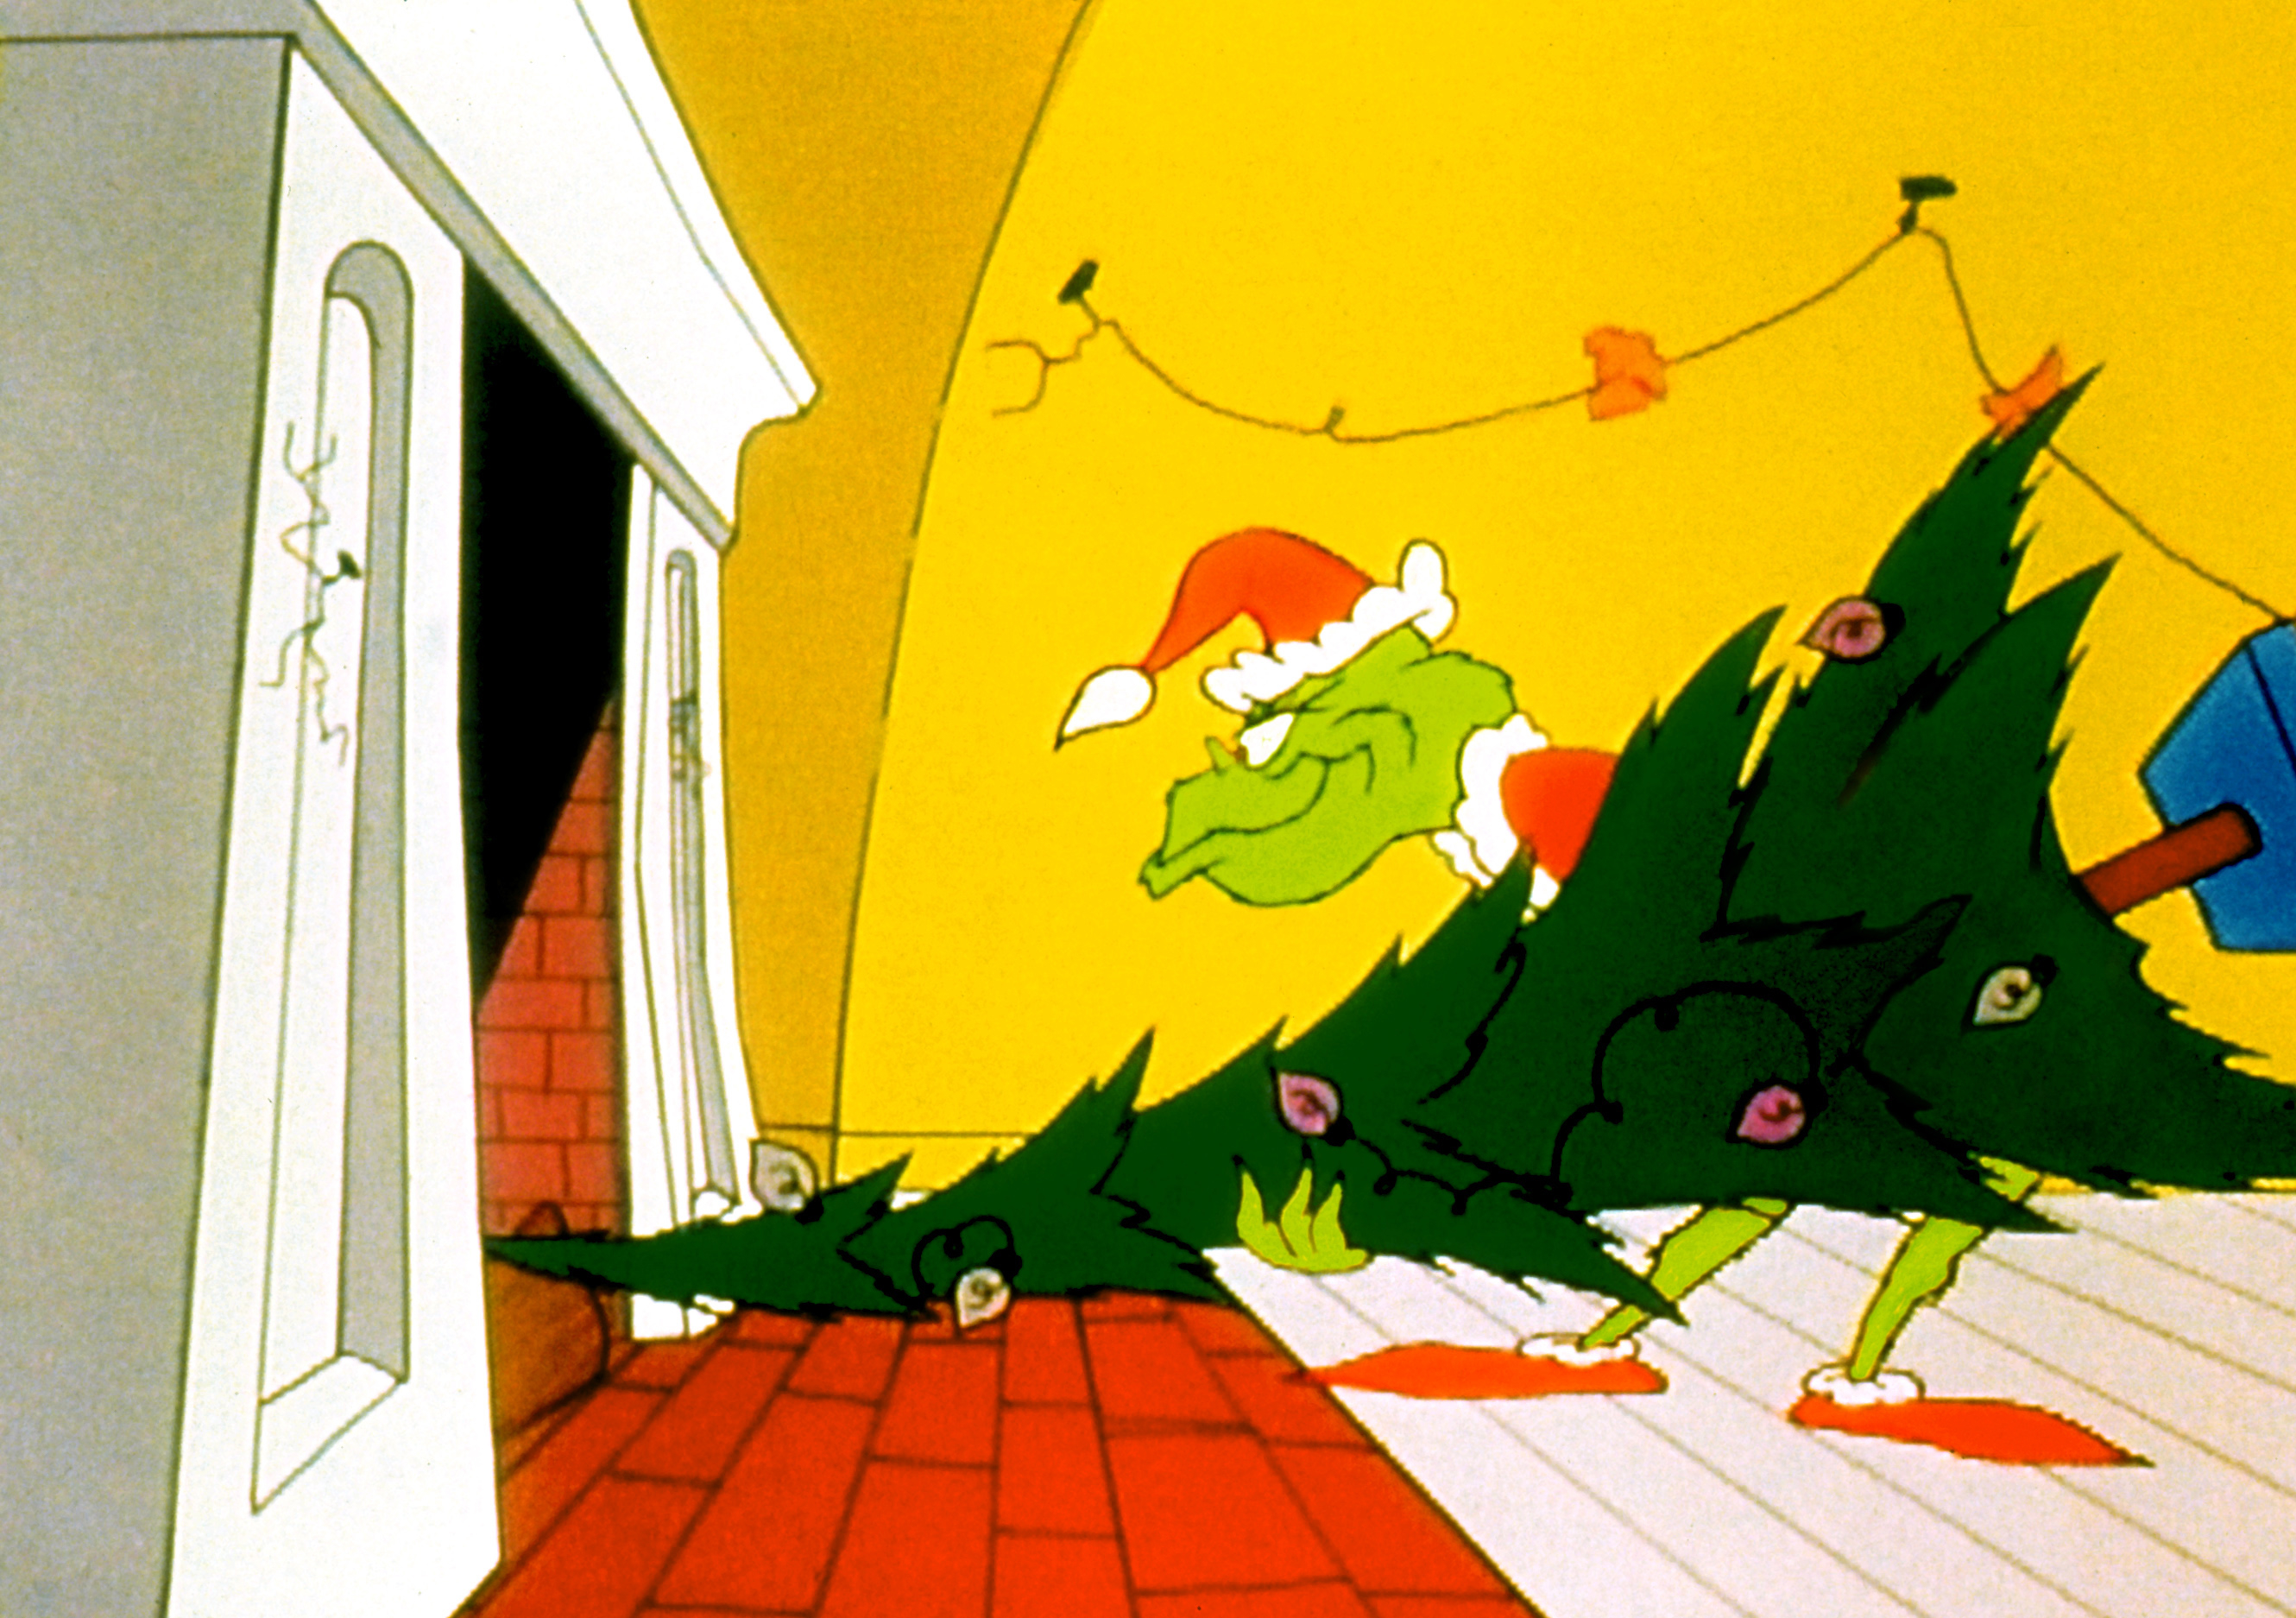 The grinch in a santa outfit shoving a christmas tree into the fireplace and up the chimney